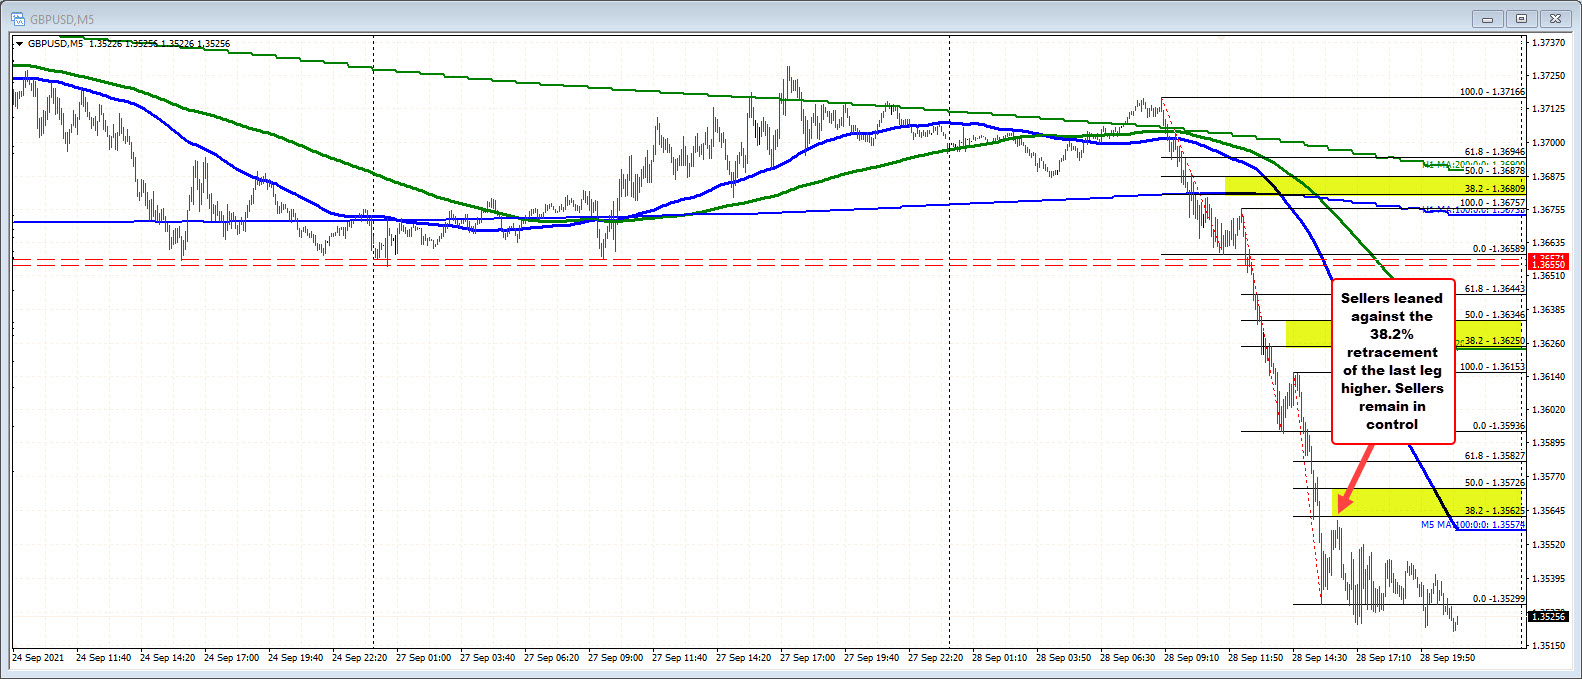 The GBPUSD on the 5 minute chart